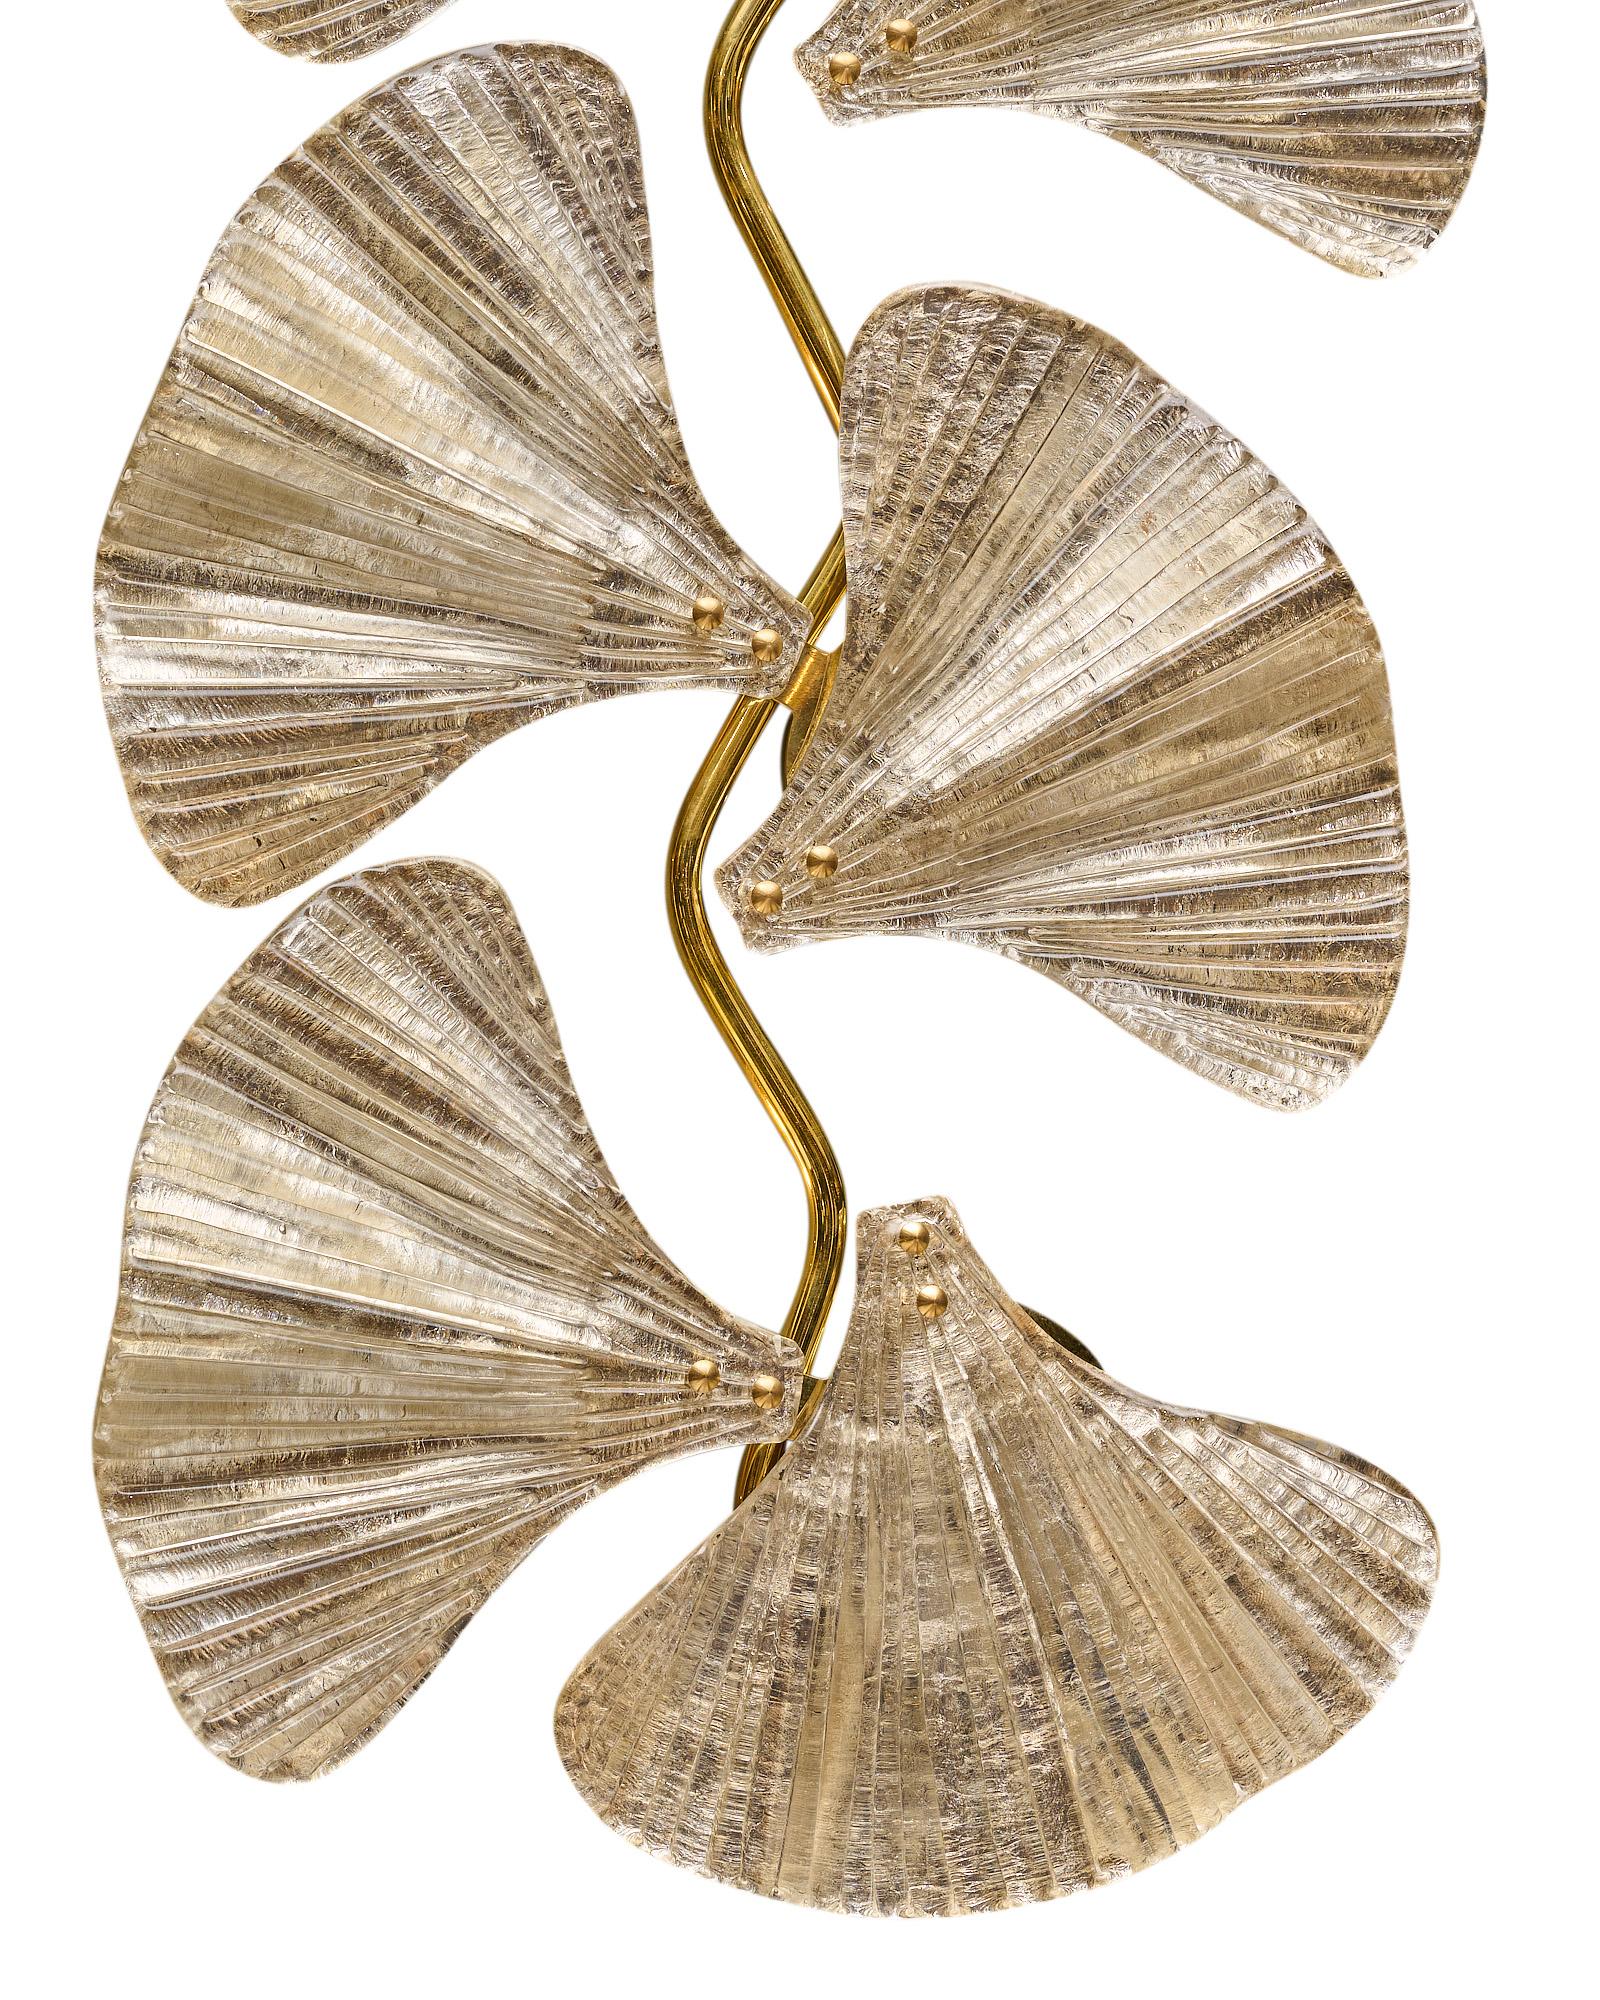 Pair of sconces, Italian, from the island of Murano. This pair is made of hand-blown glass with silver leaf in the delicate shape of ginkgo leaves. They are supported on a brass structure. Newly wired to fit US standards.